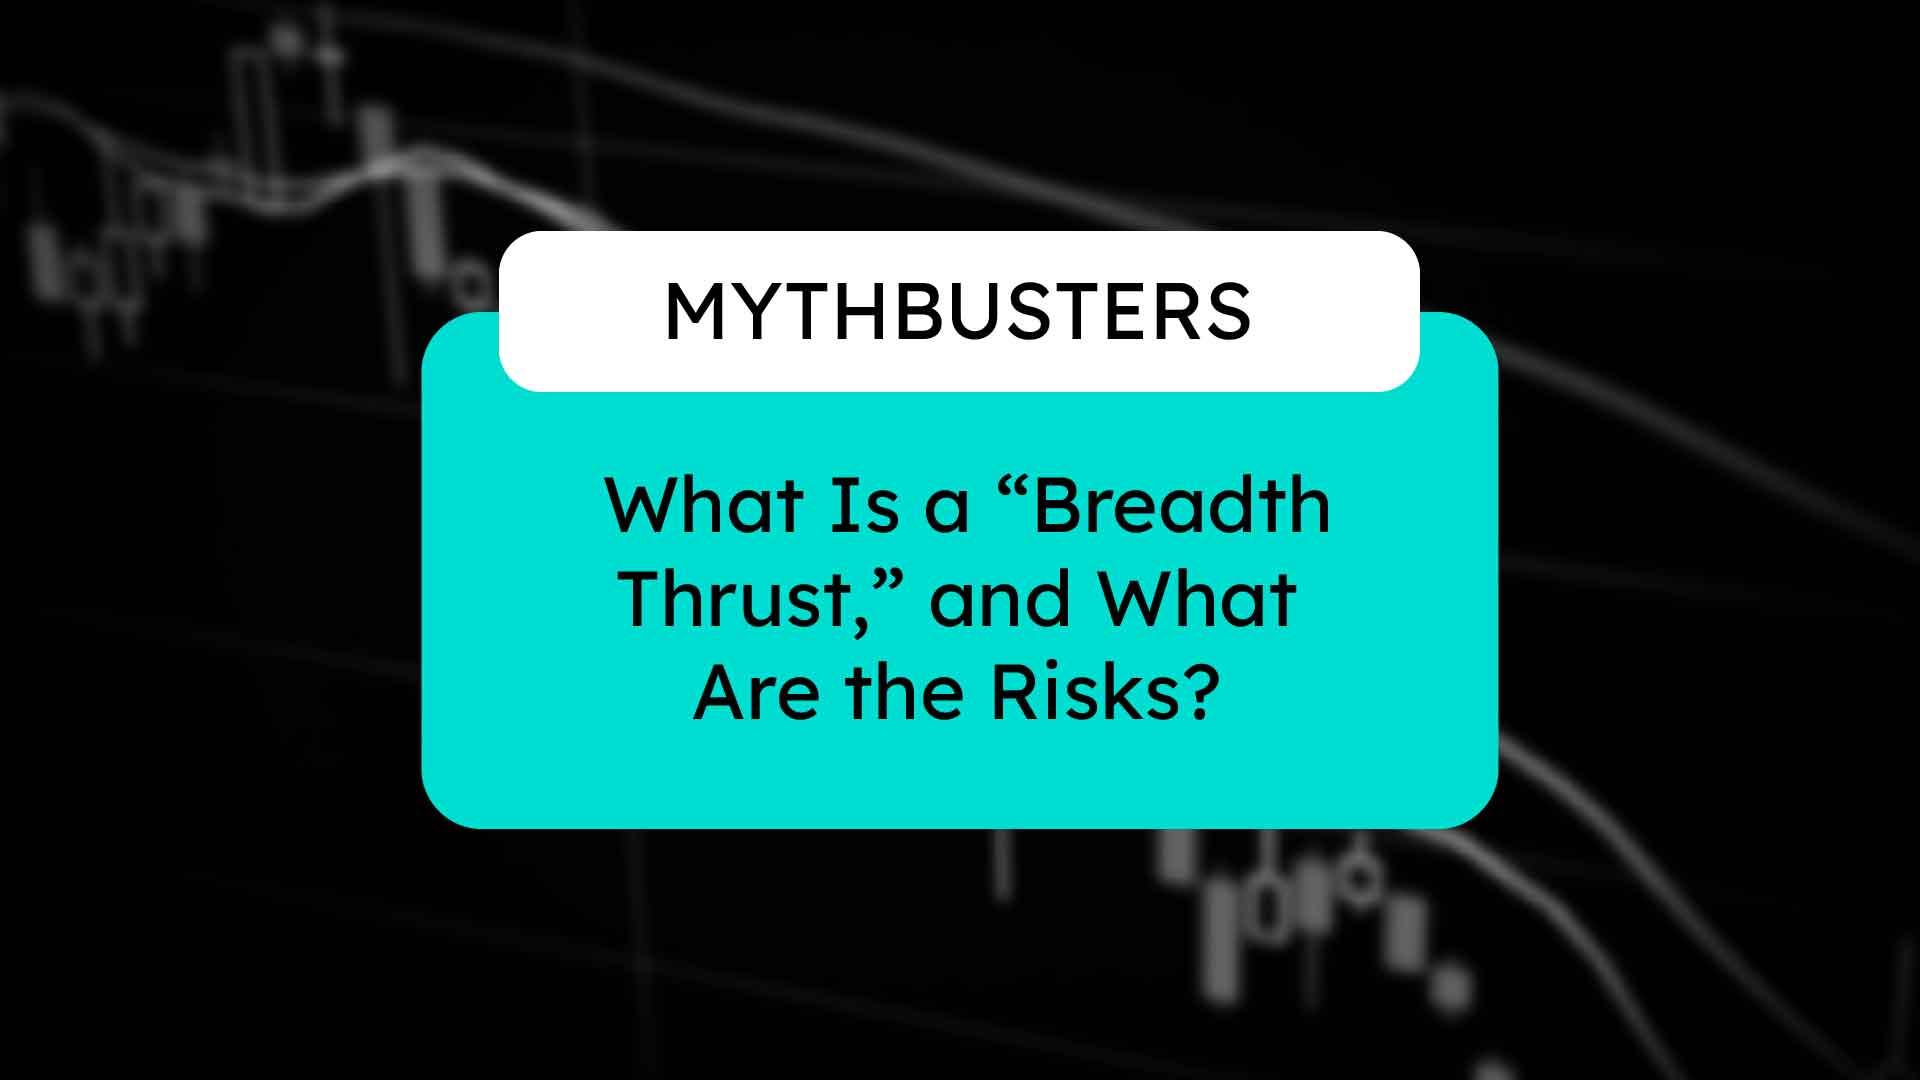 What Is a “Breadth Thrust,” and What Are the Risks?